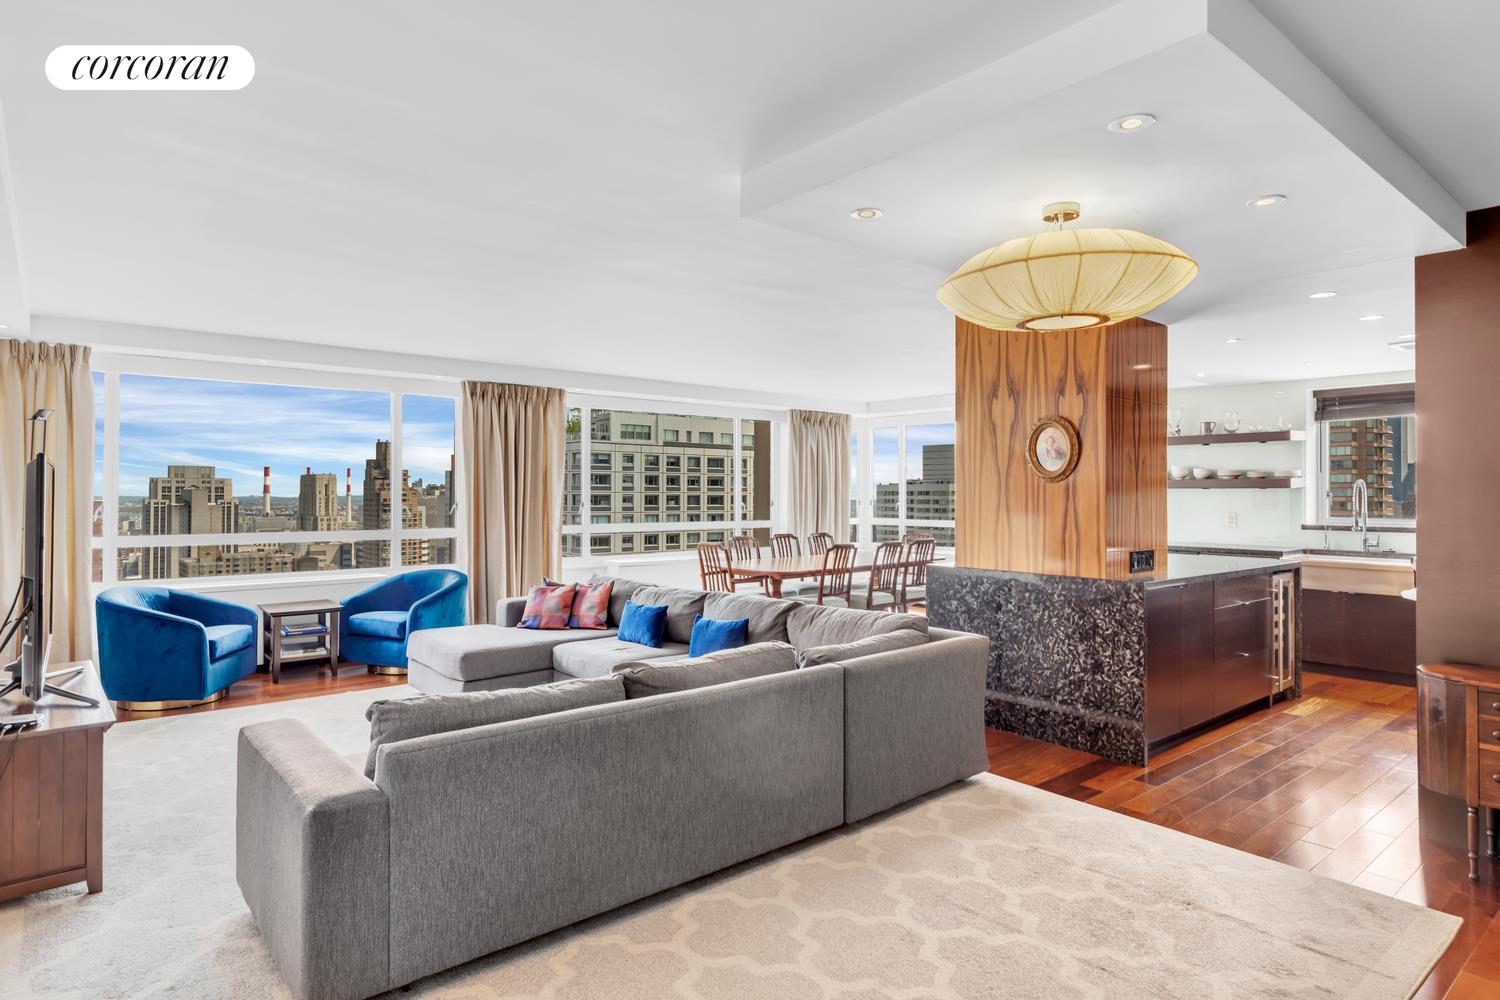 190 East 72nd Street 34Dc, Lenox Hill, Upper East Side, NYC - 6 Bedrooms  
6 Bathrooms  
14 Rooms - 